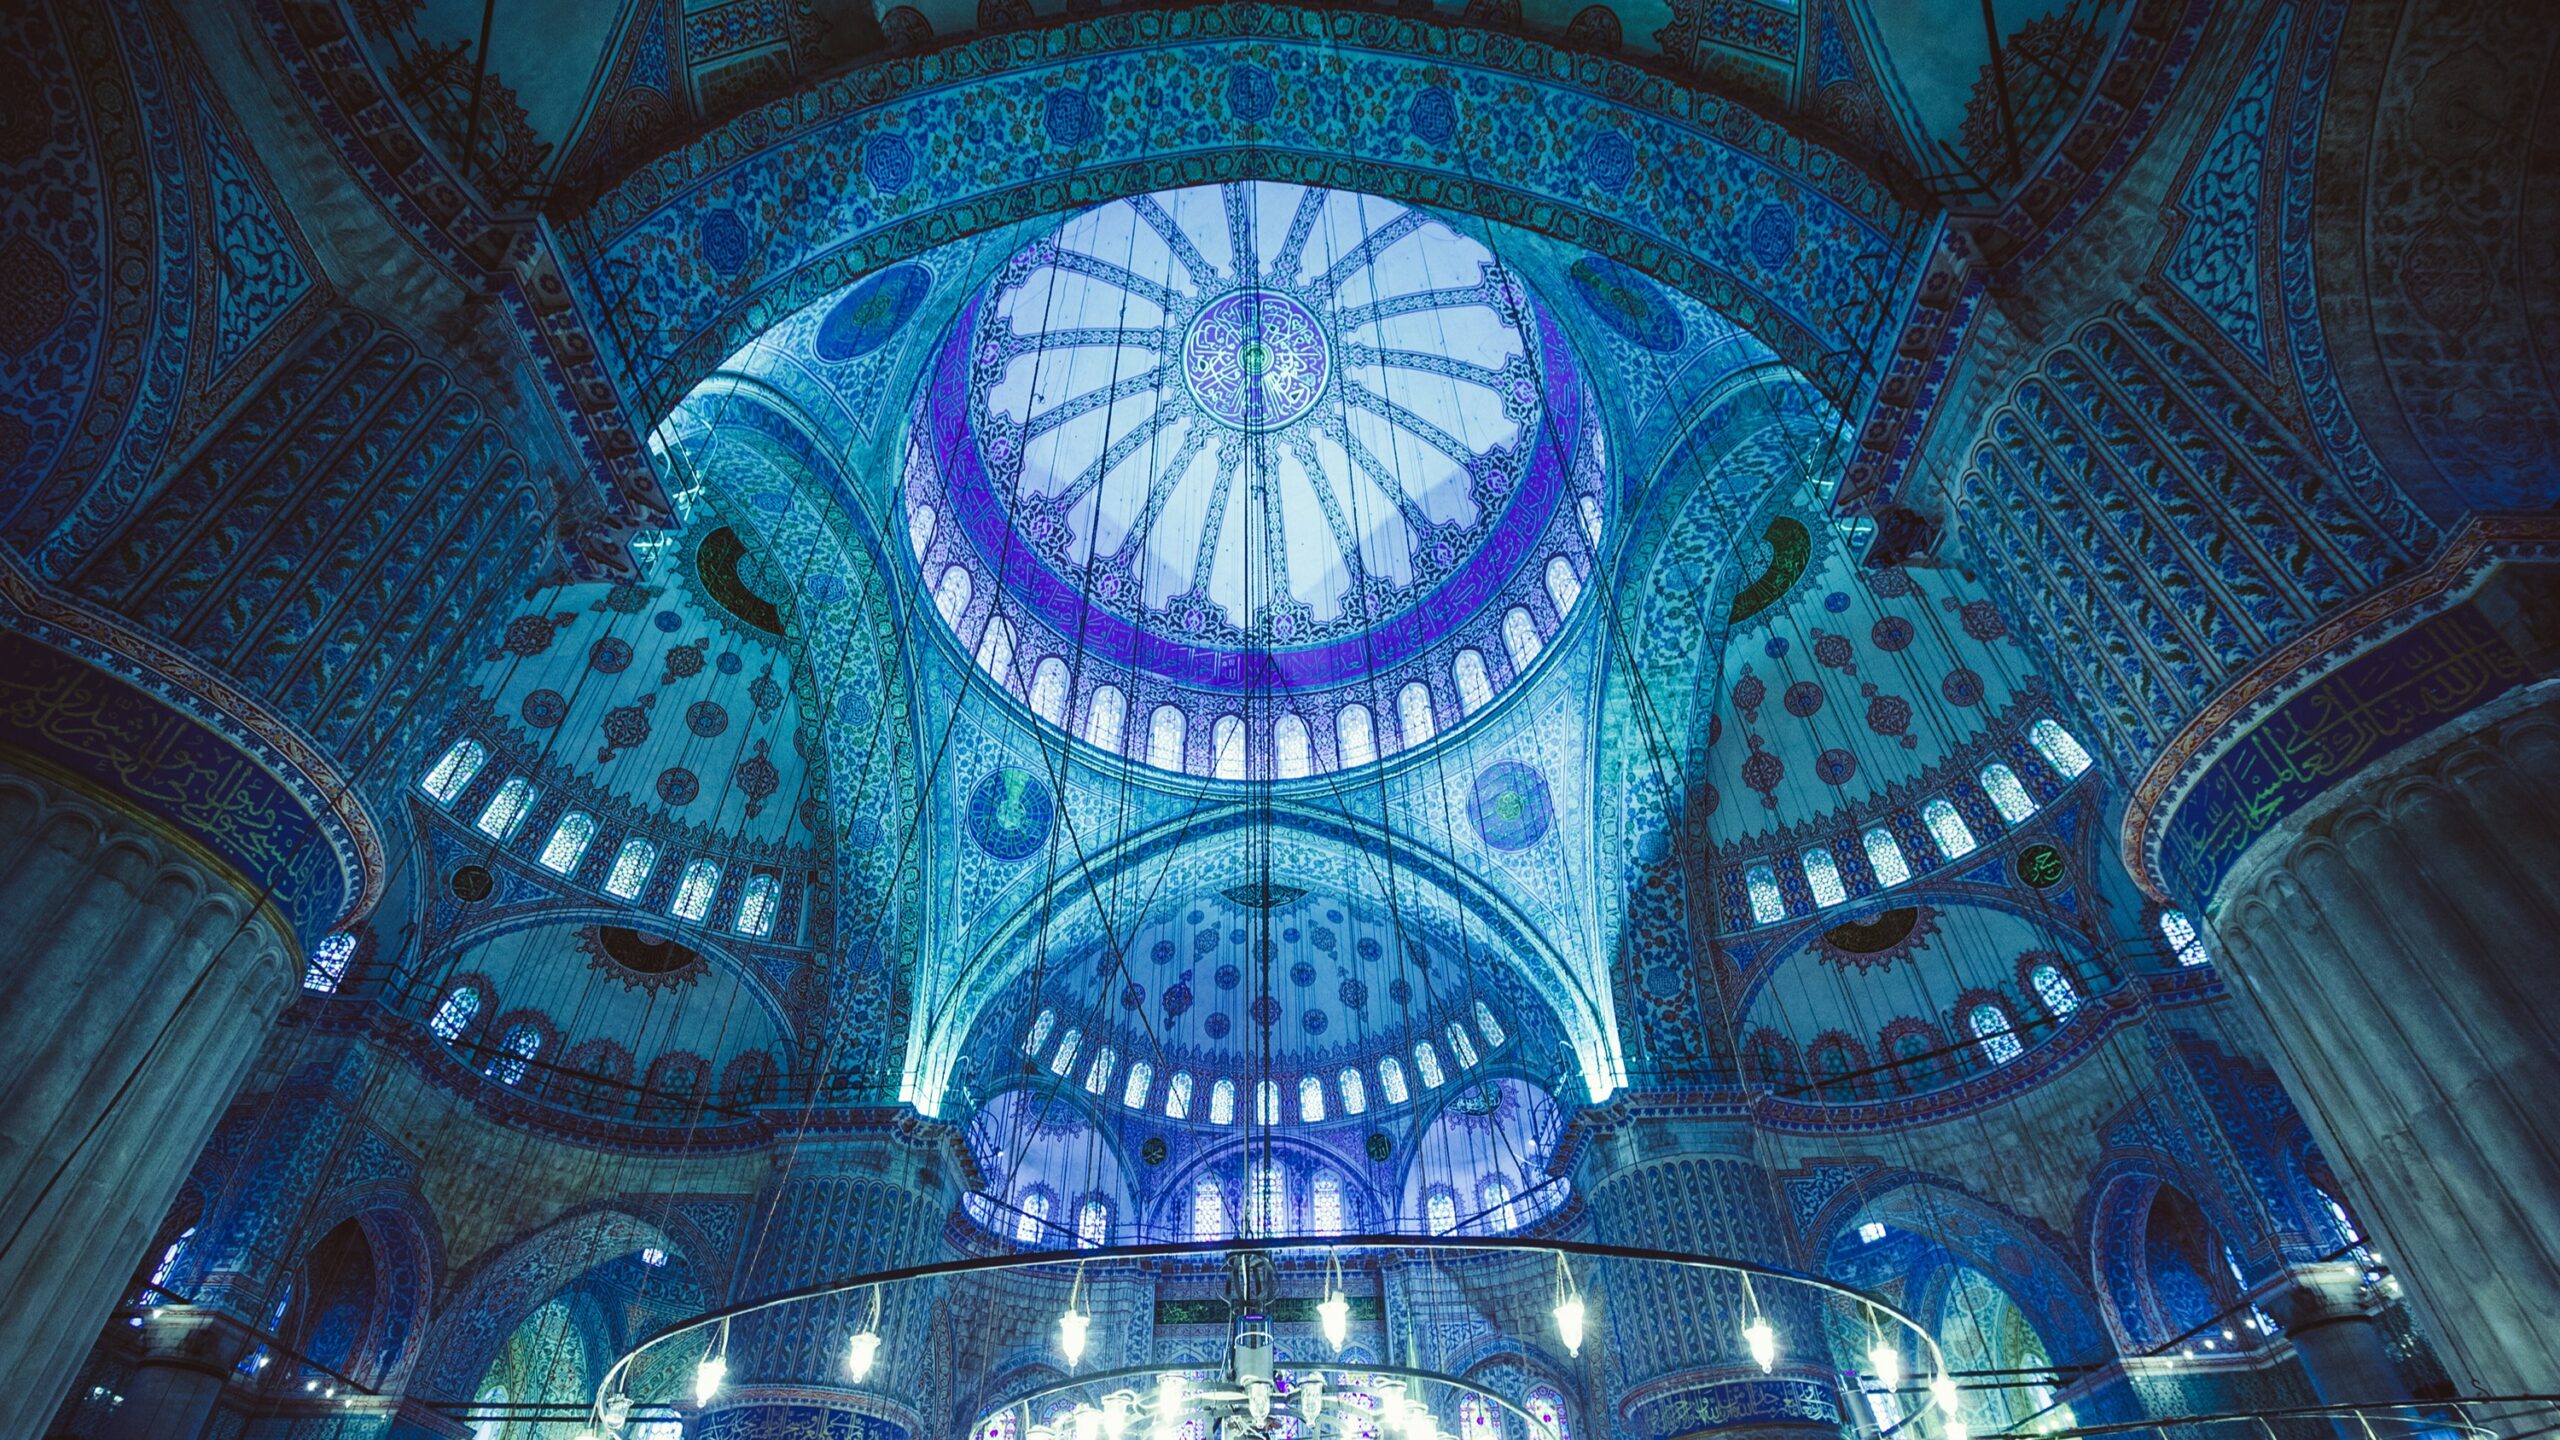 The Historical Blue Mosque or Sultan Ahmet Cami of istanbul